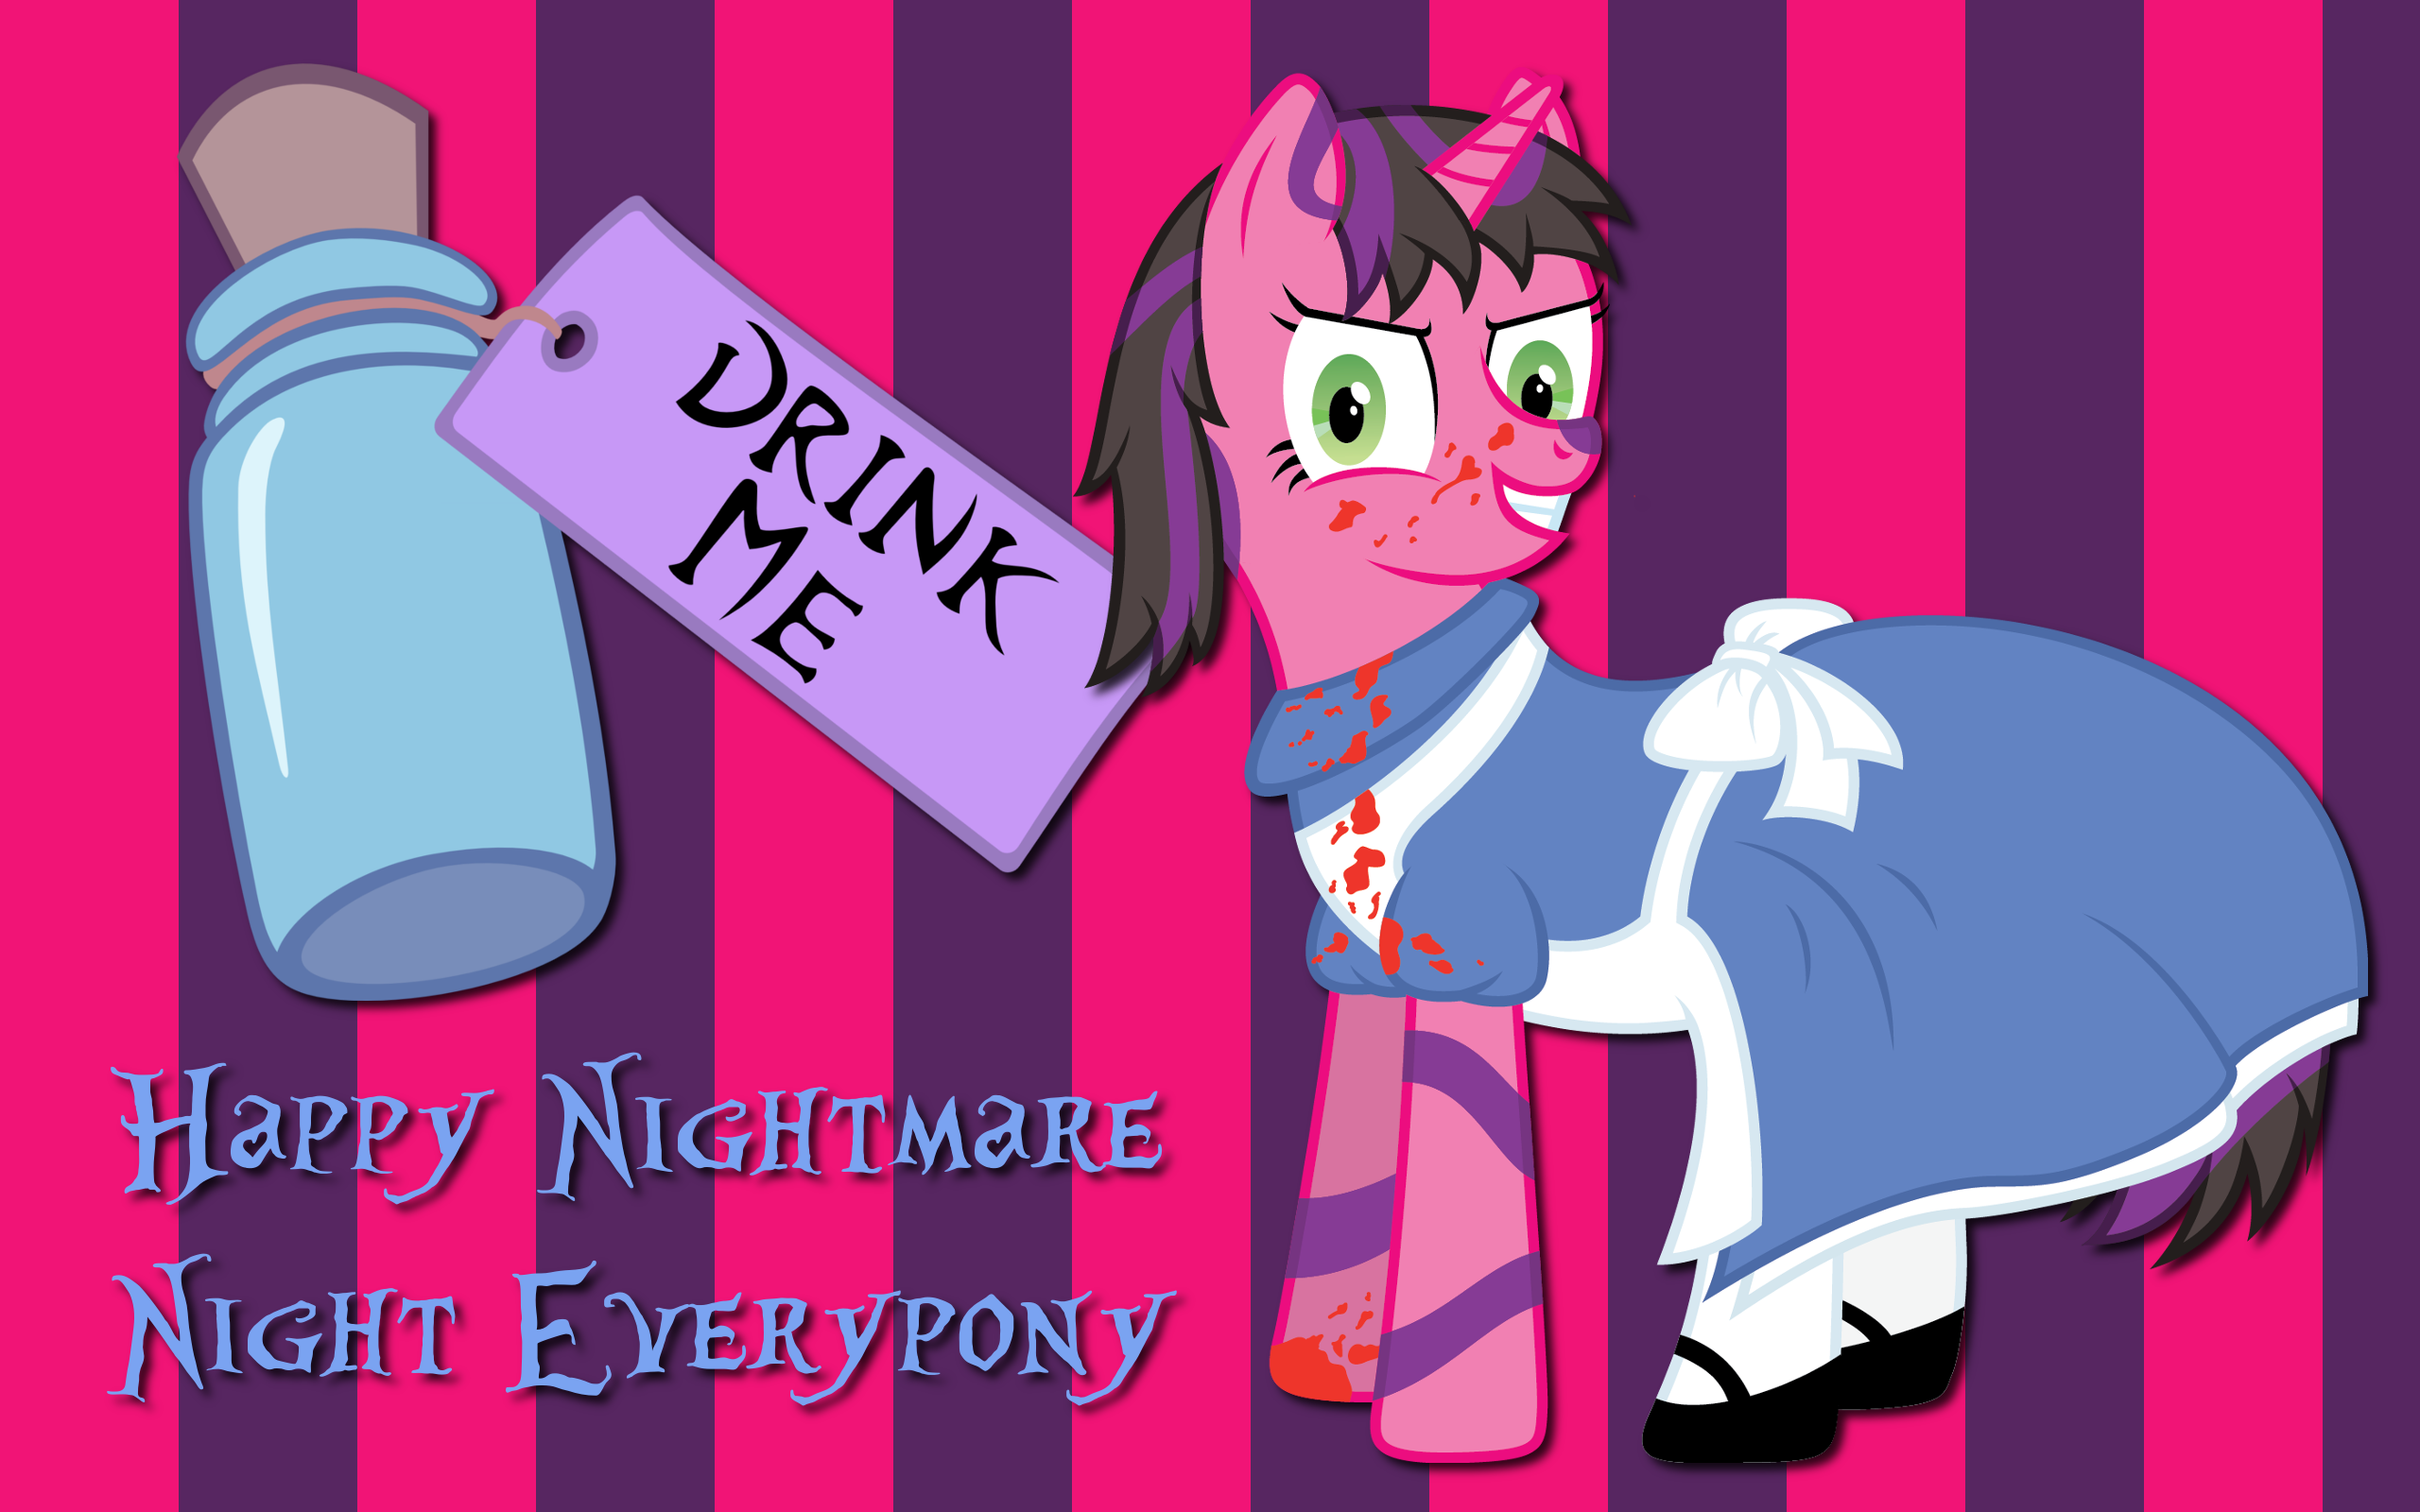 Alice Dreamer NM Night WP by AliceHumanSacrifice0, pageturner1988 and The-Smiling-Pony